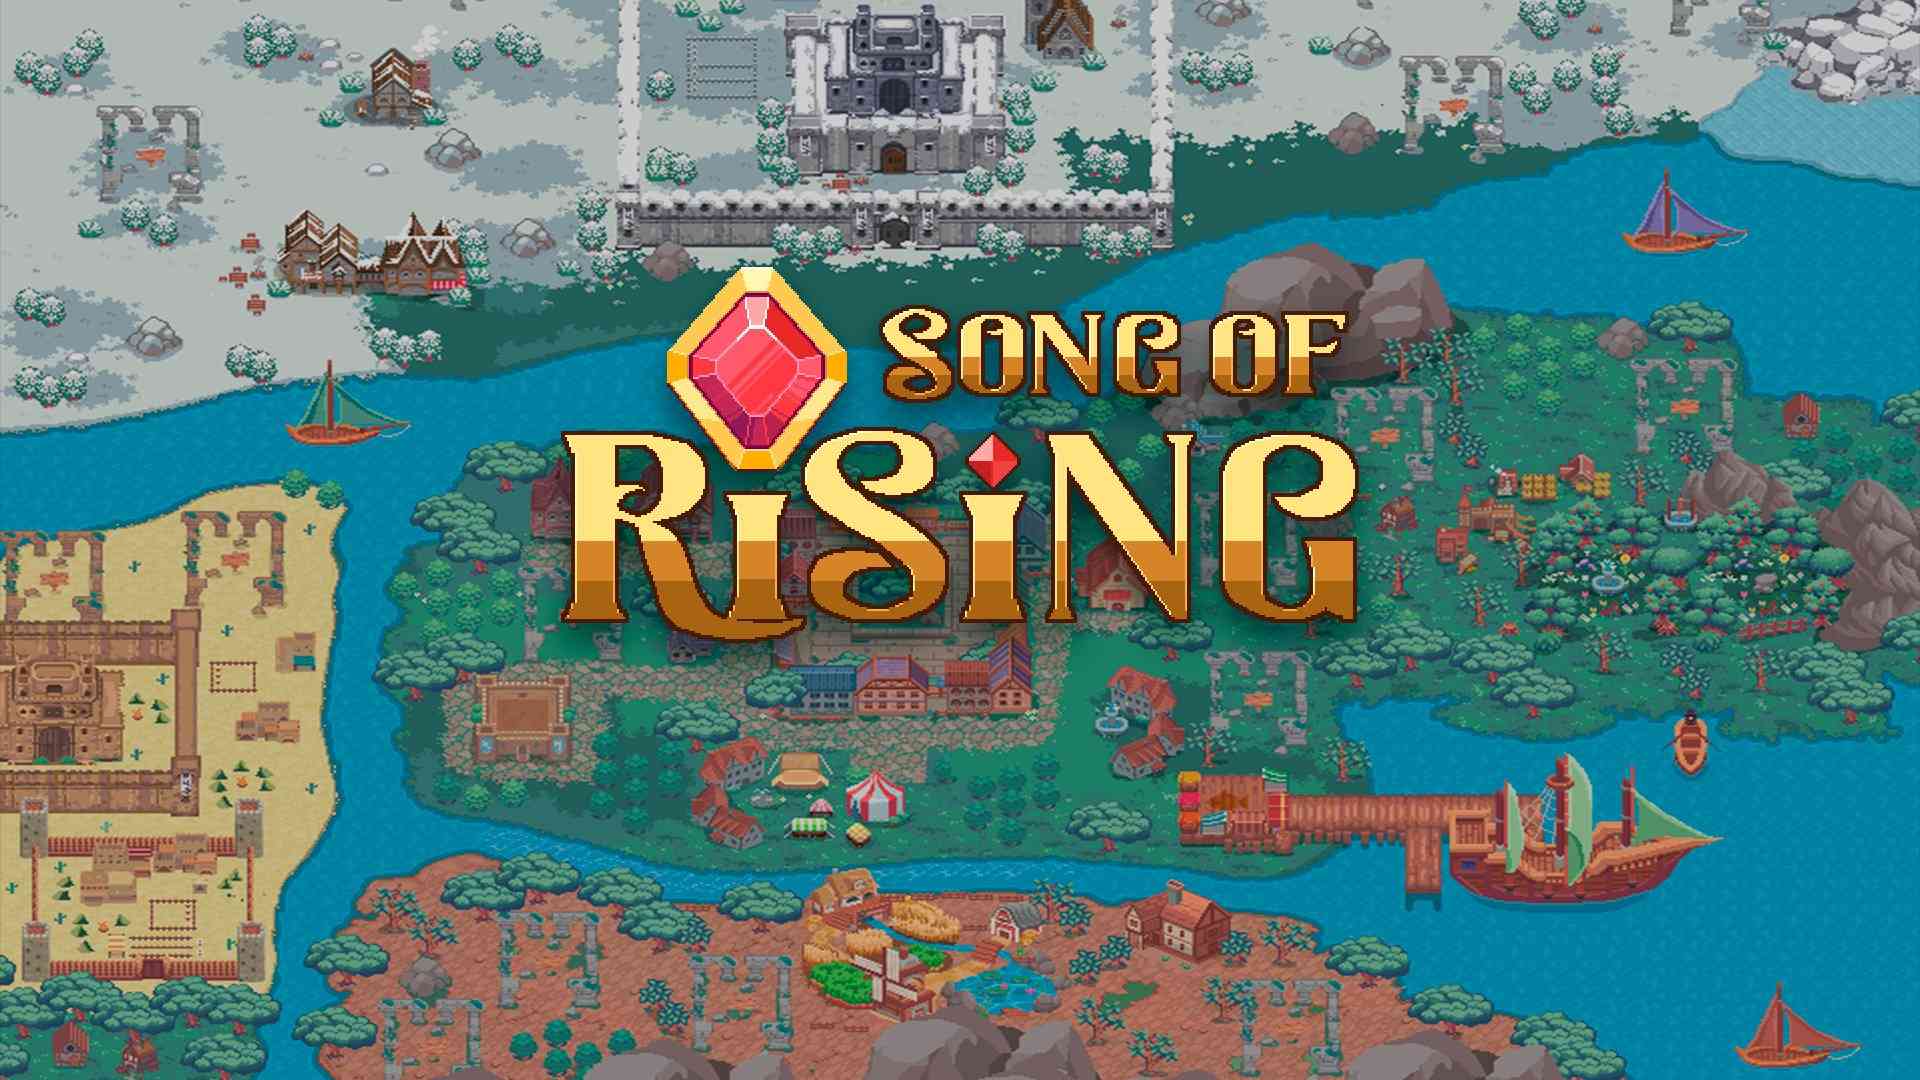 Song of Rising: Pixel-Style Metaverse with DeFi and NFT Heroes